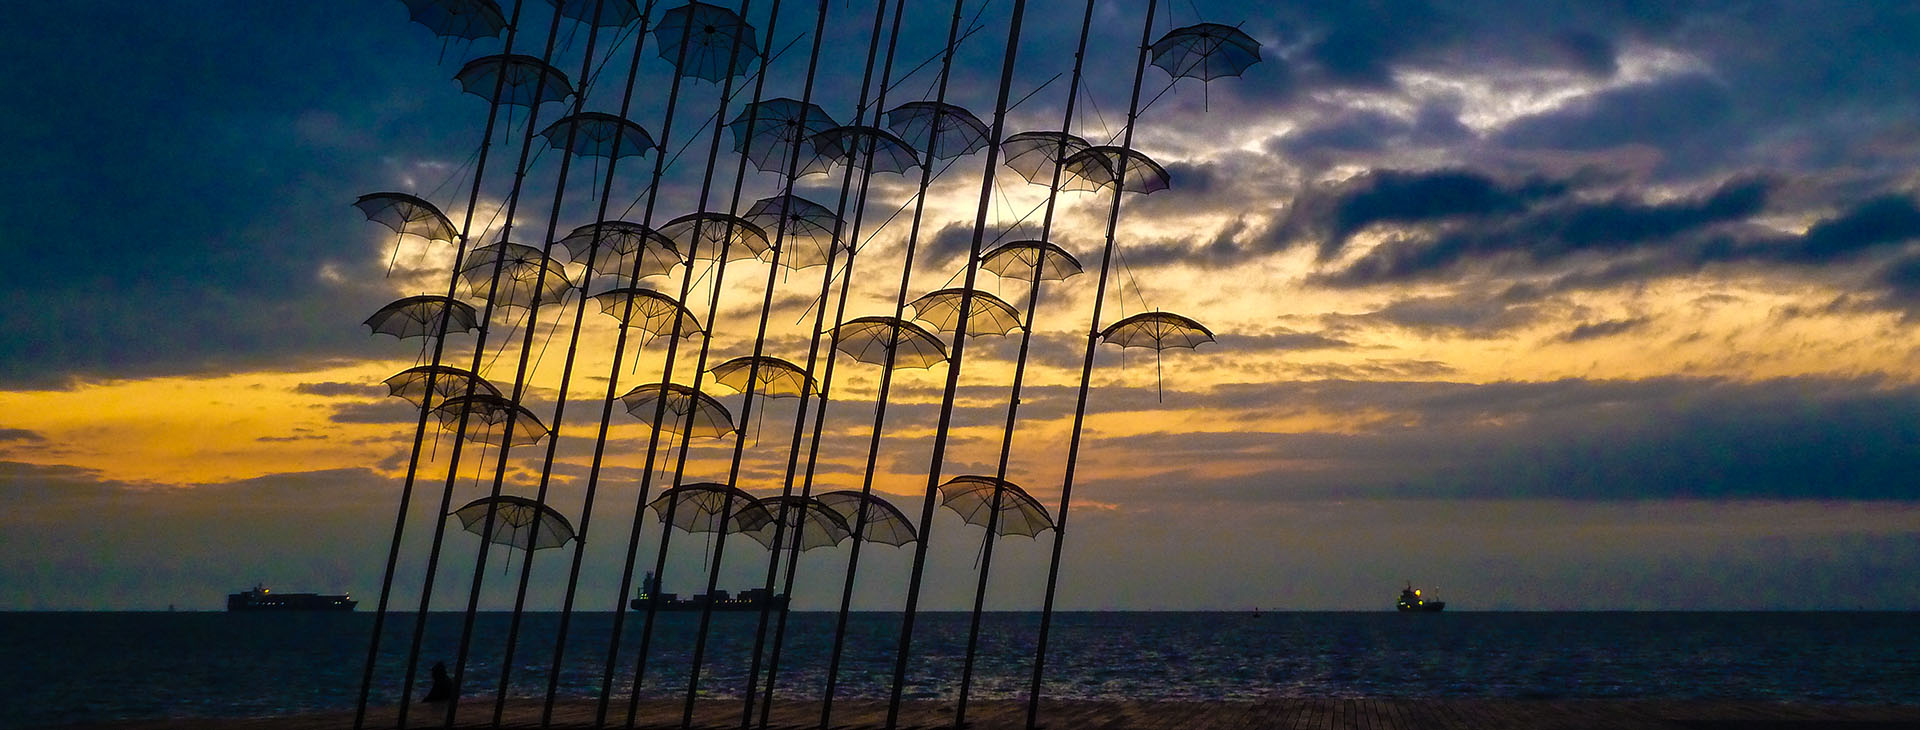 “Umbrellas” modern art statue during sunset at the seafront of Thessaloniki City